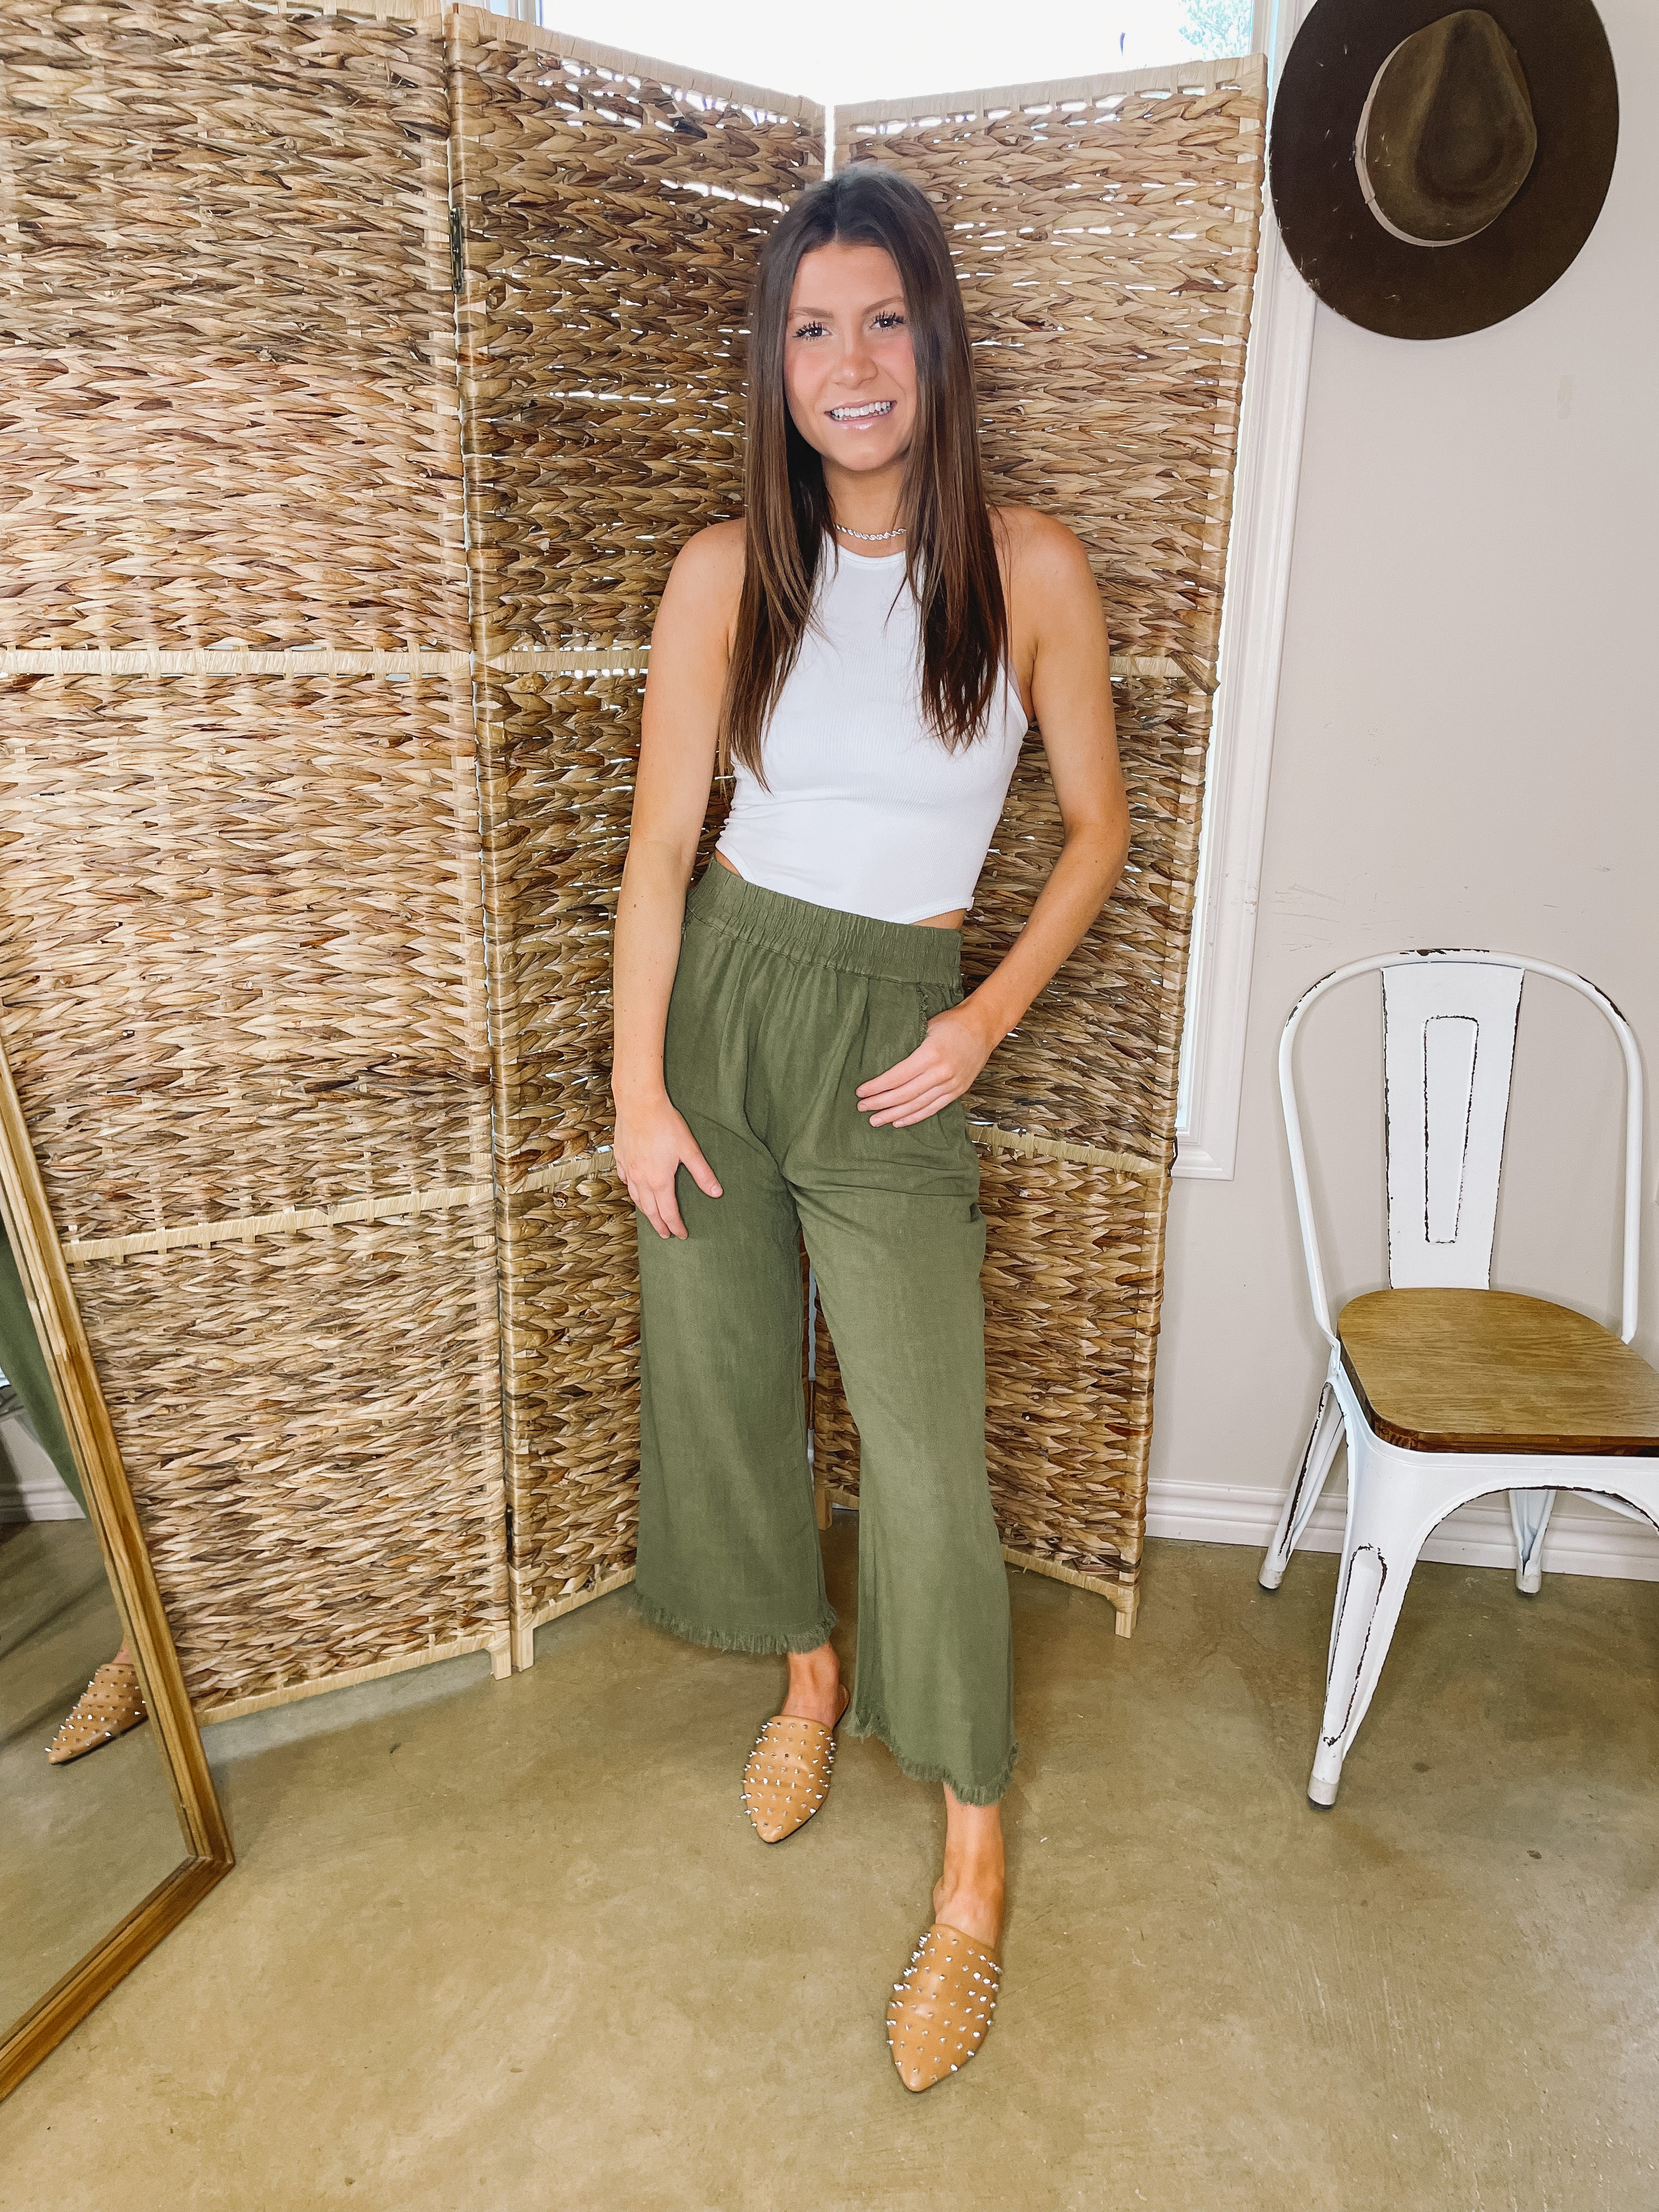 Right On Cue Drawstring Cropped Pants with Frayed Hem in Olive Green - Giddy Up Glamour Boutique